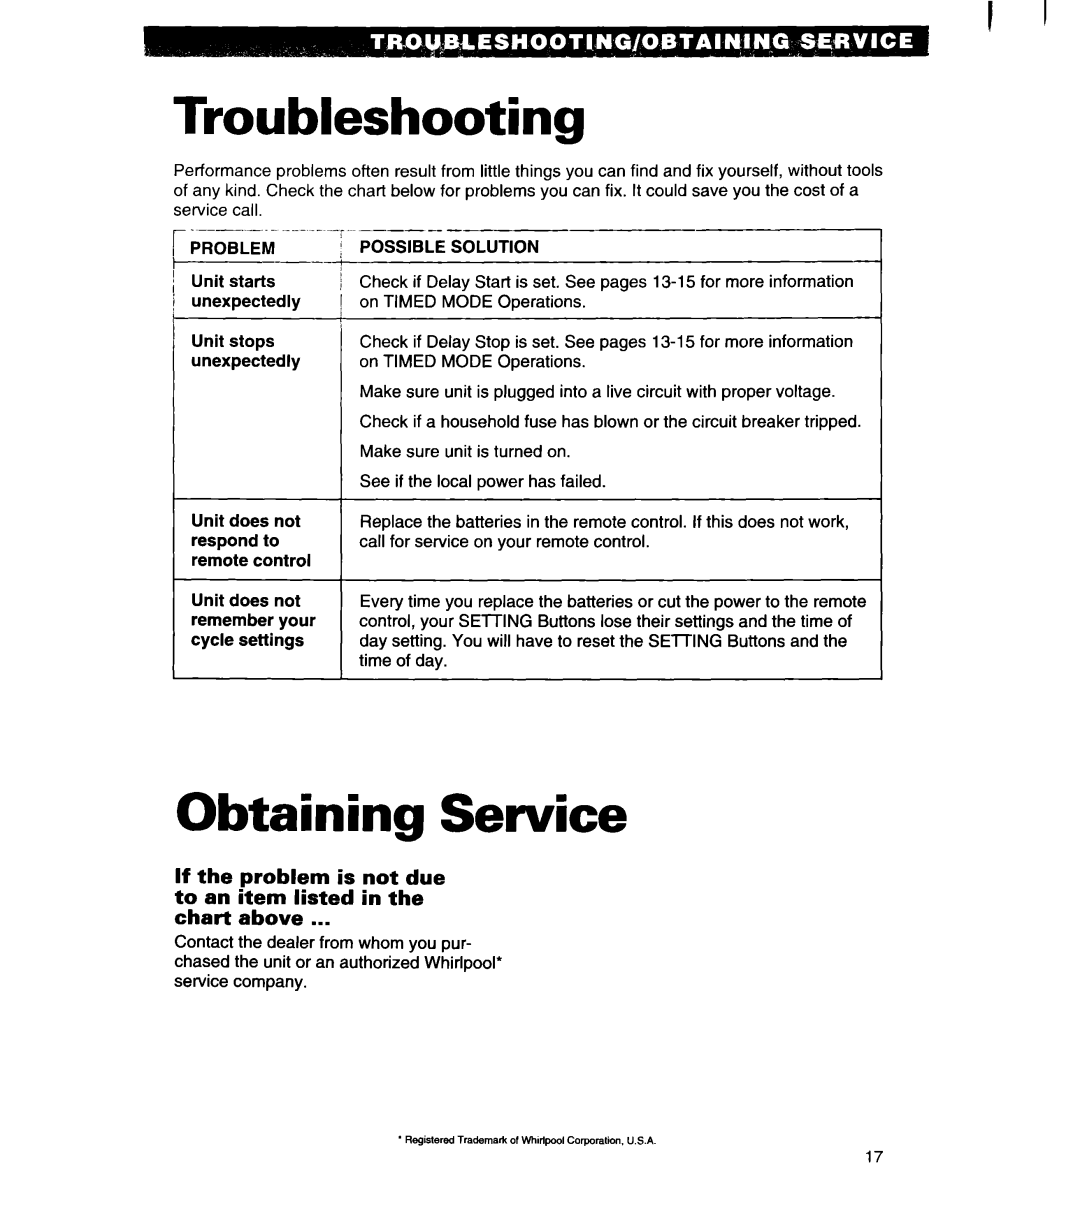 Whirlpool 1180435-A Troubleshooting, Obtaining Service, If the problem is not due to an item listed in the chart above 